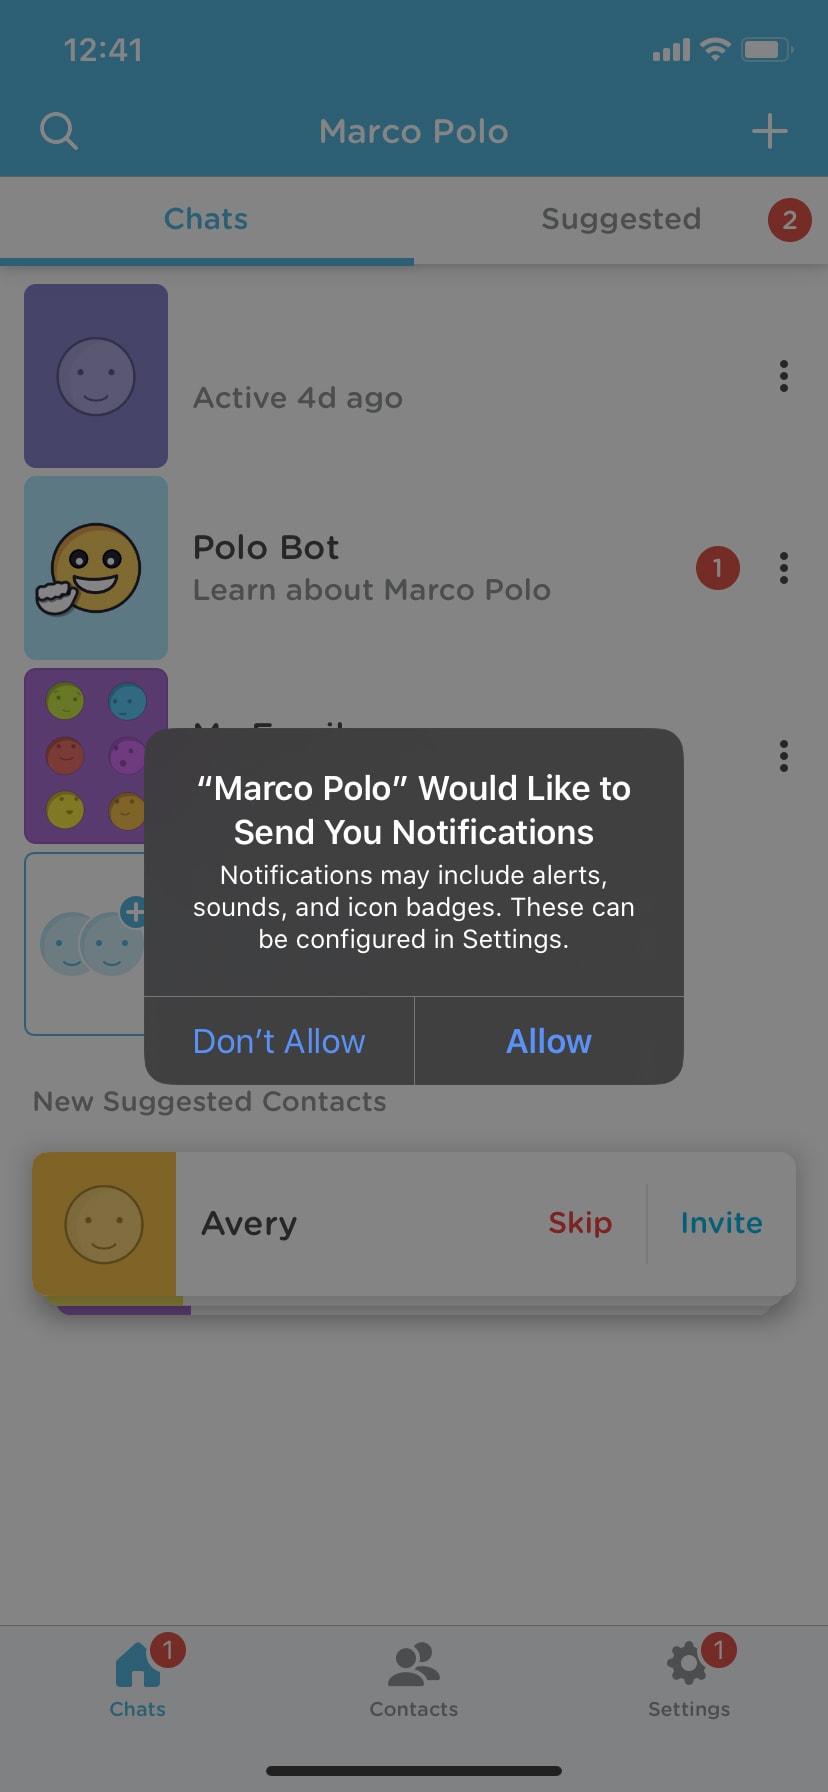 Marco Polo: What It Is And How To Use The App